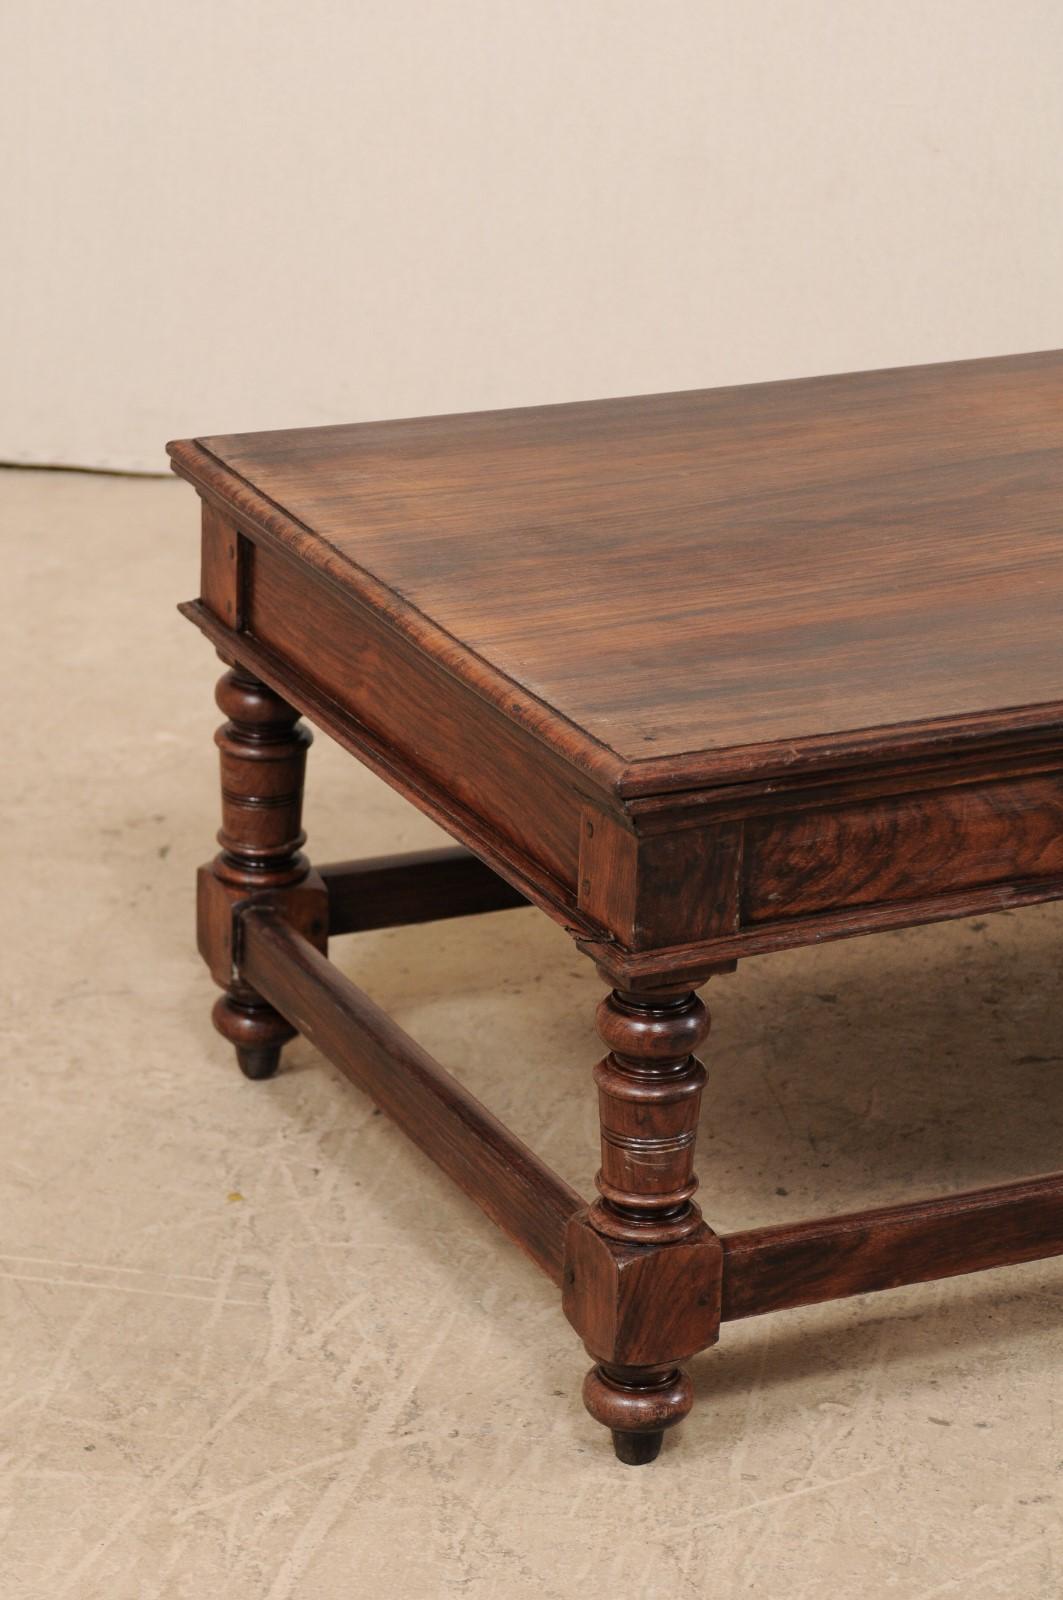 A Beautiful Pair of 6 Ft. Rosewood Coffee Tables (or Benches) from Kerala, India 2